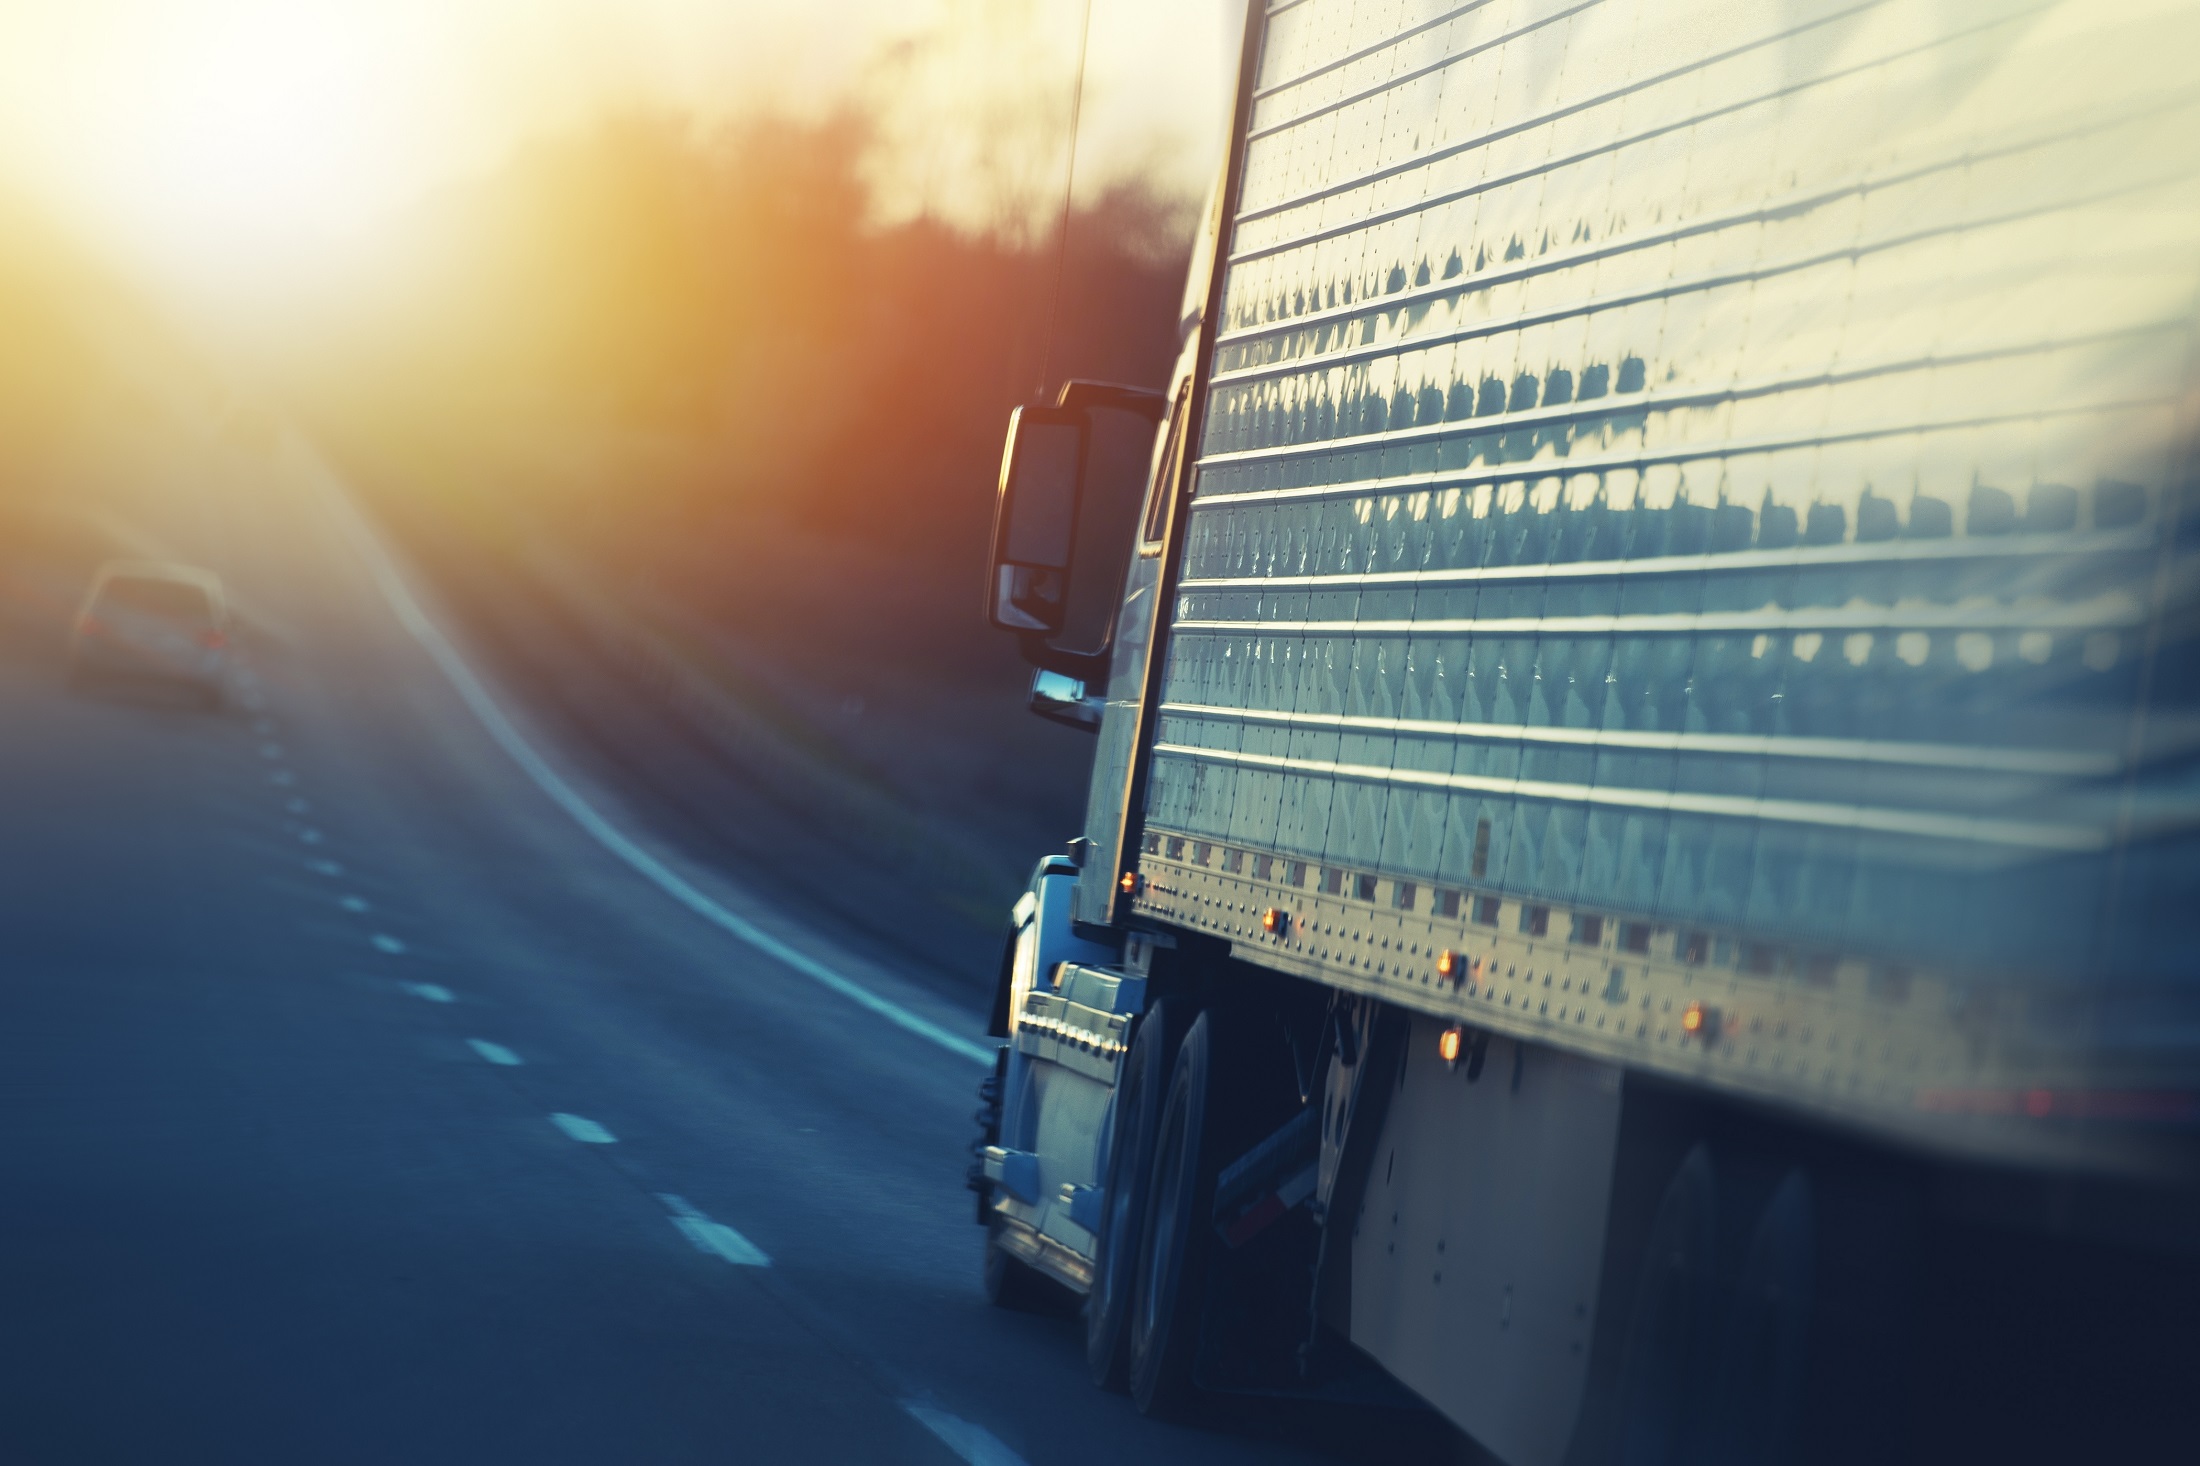 Trucking Industry Assistance is Theme for 2022 Photo